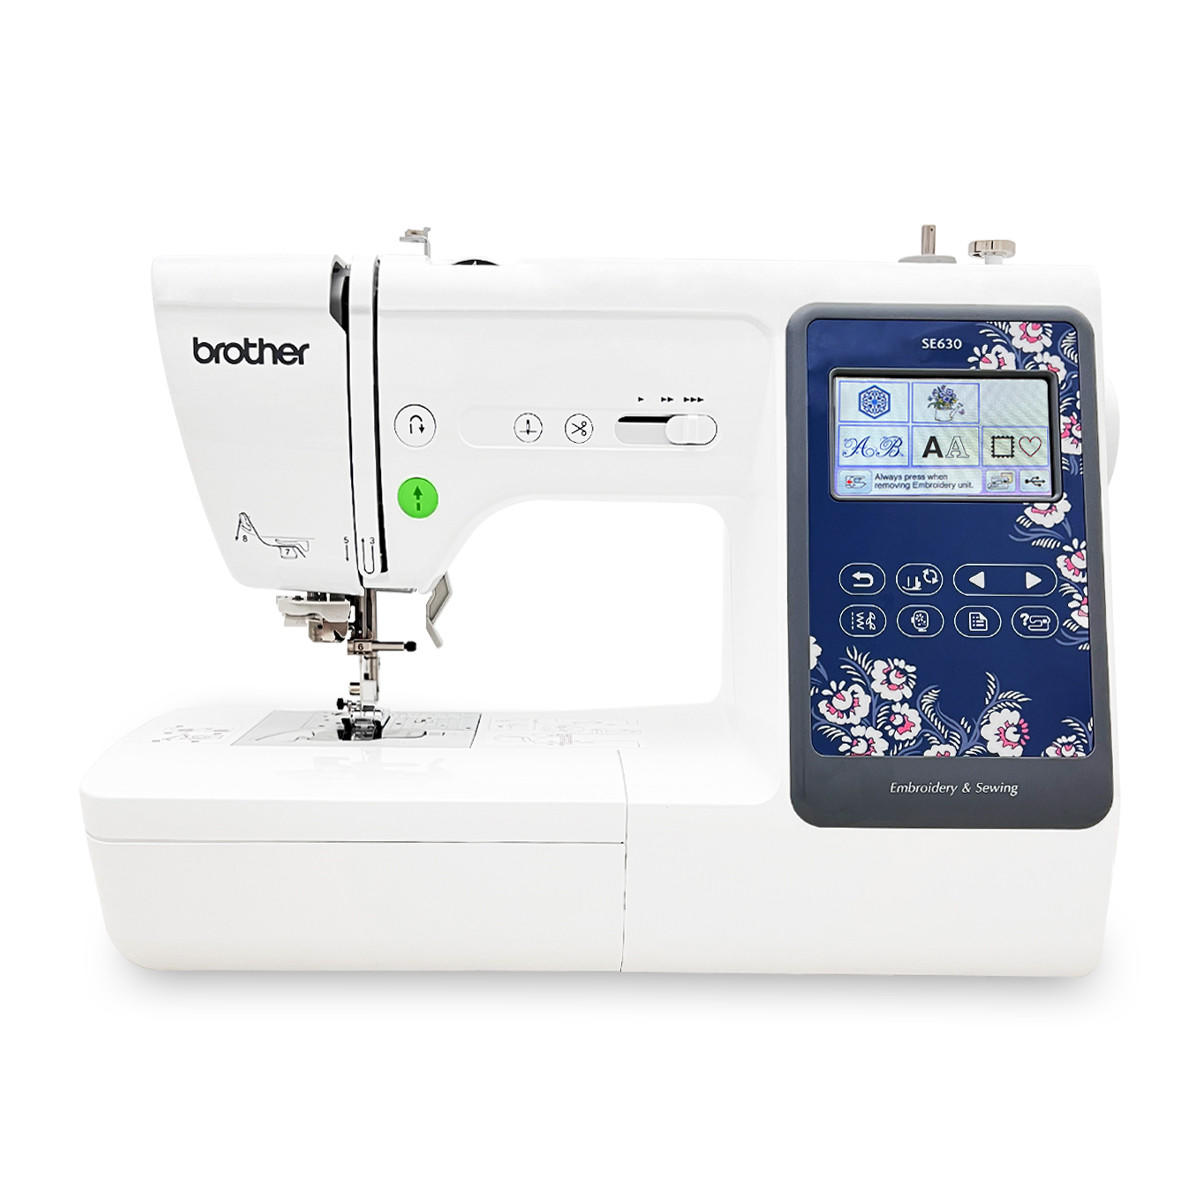 Brother SE600 embroidery/sewing machine -reduced price - arts